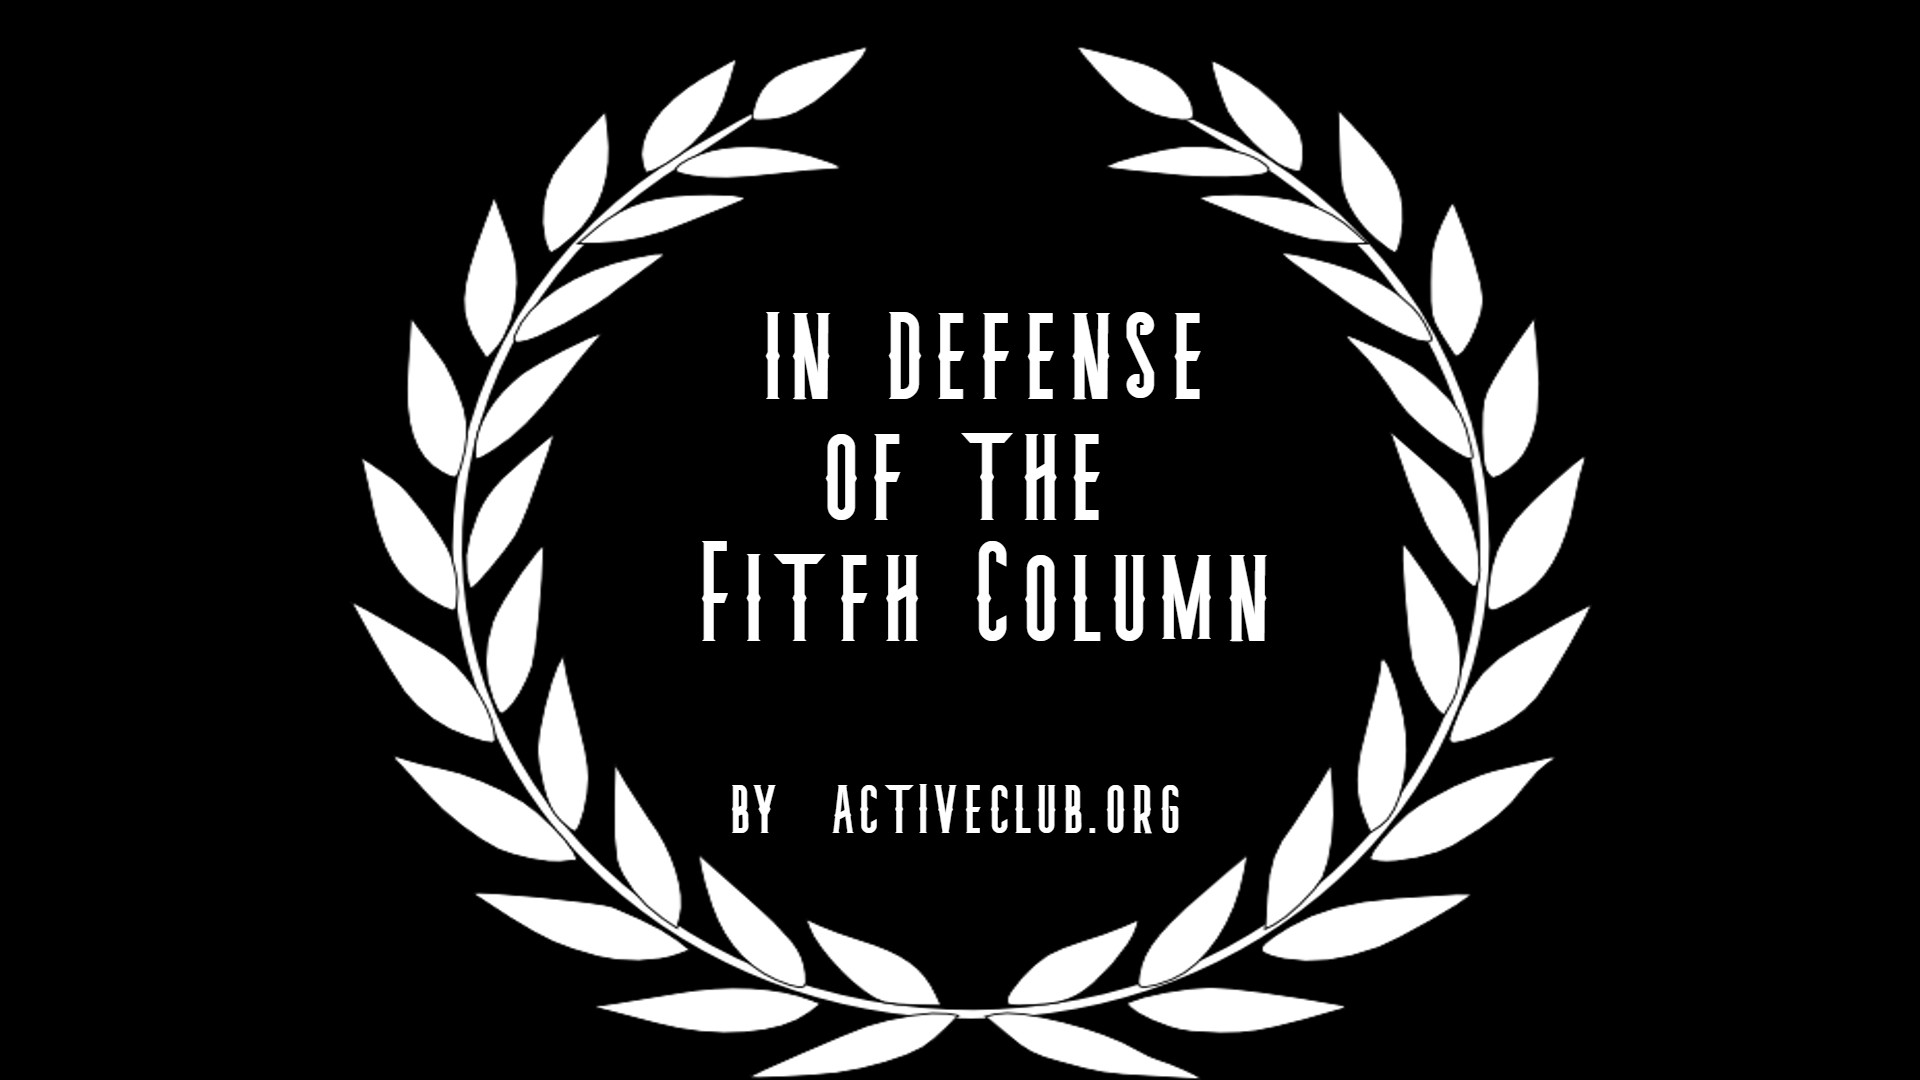 In Defense of the fifth column